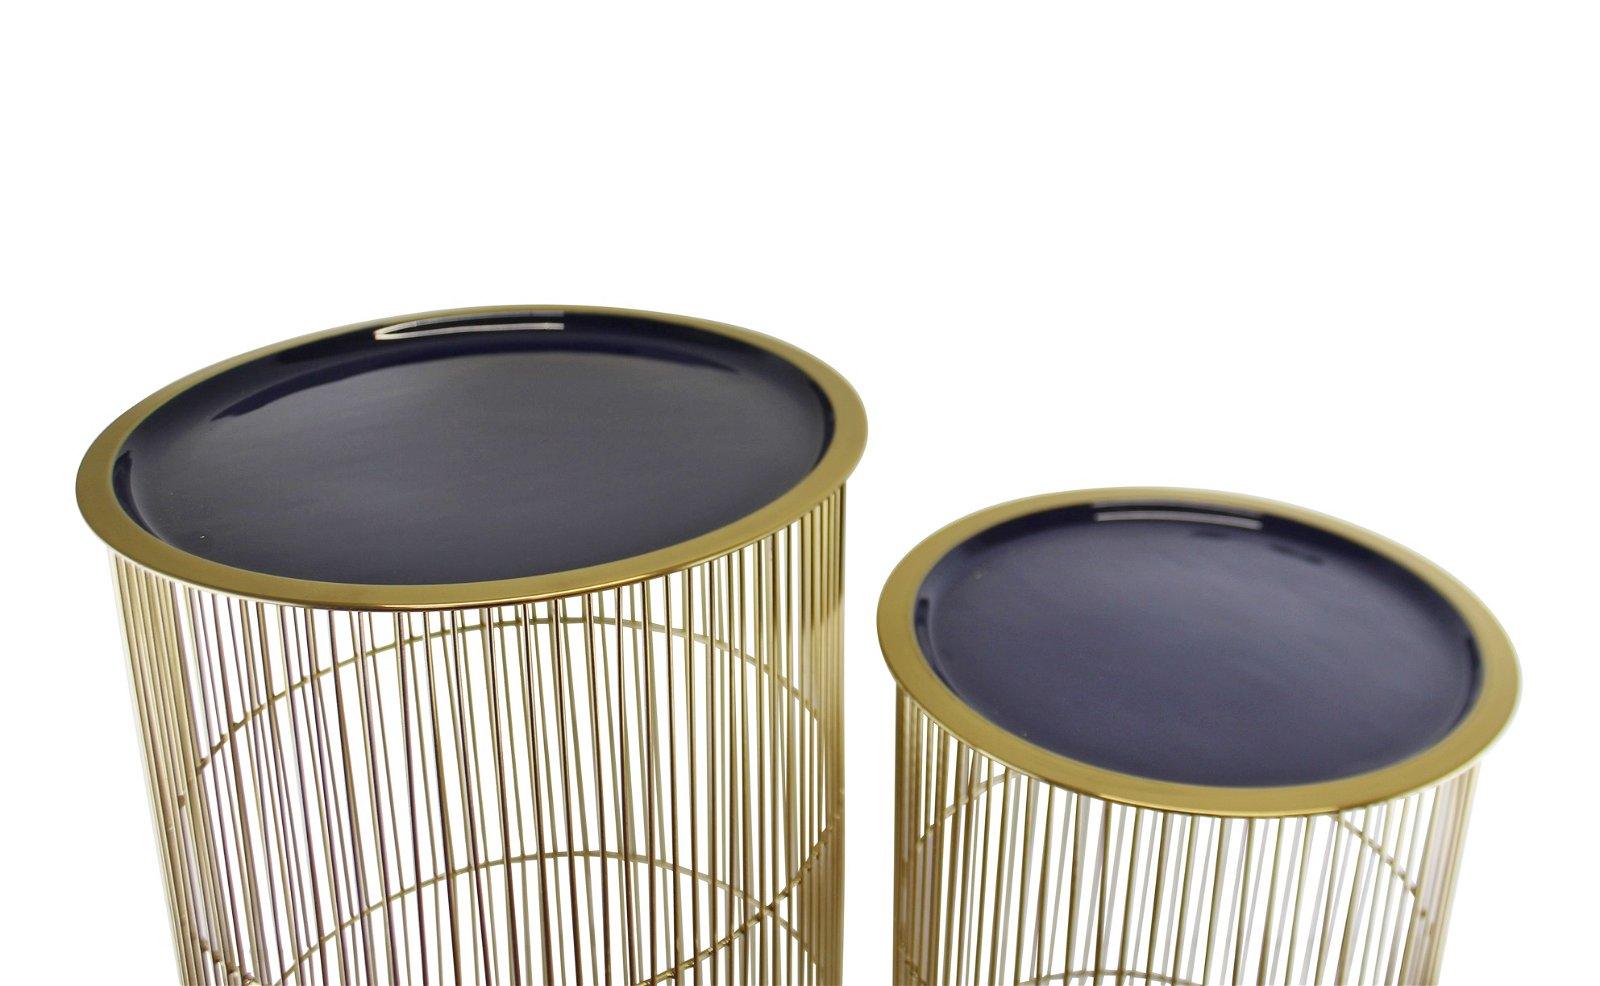 View Set of 2 Decorative Side Tables in Gold Navy Blue information